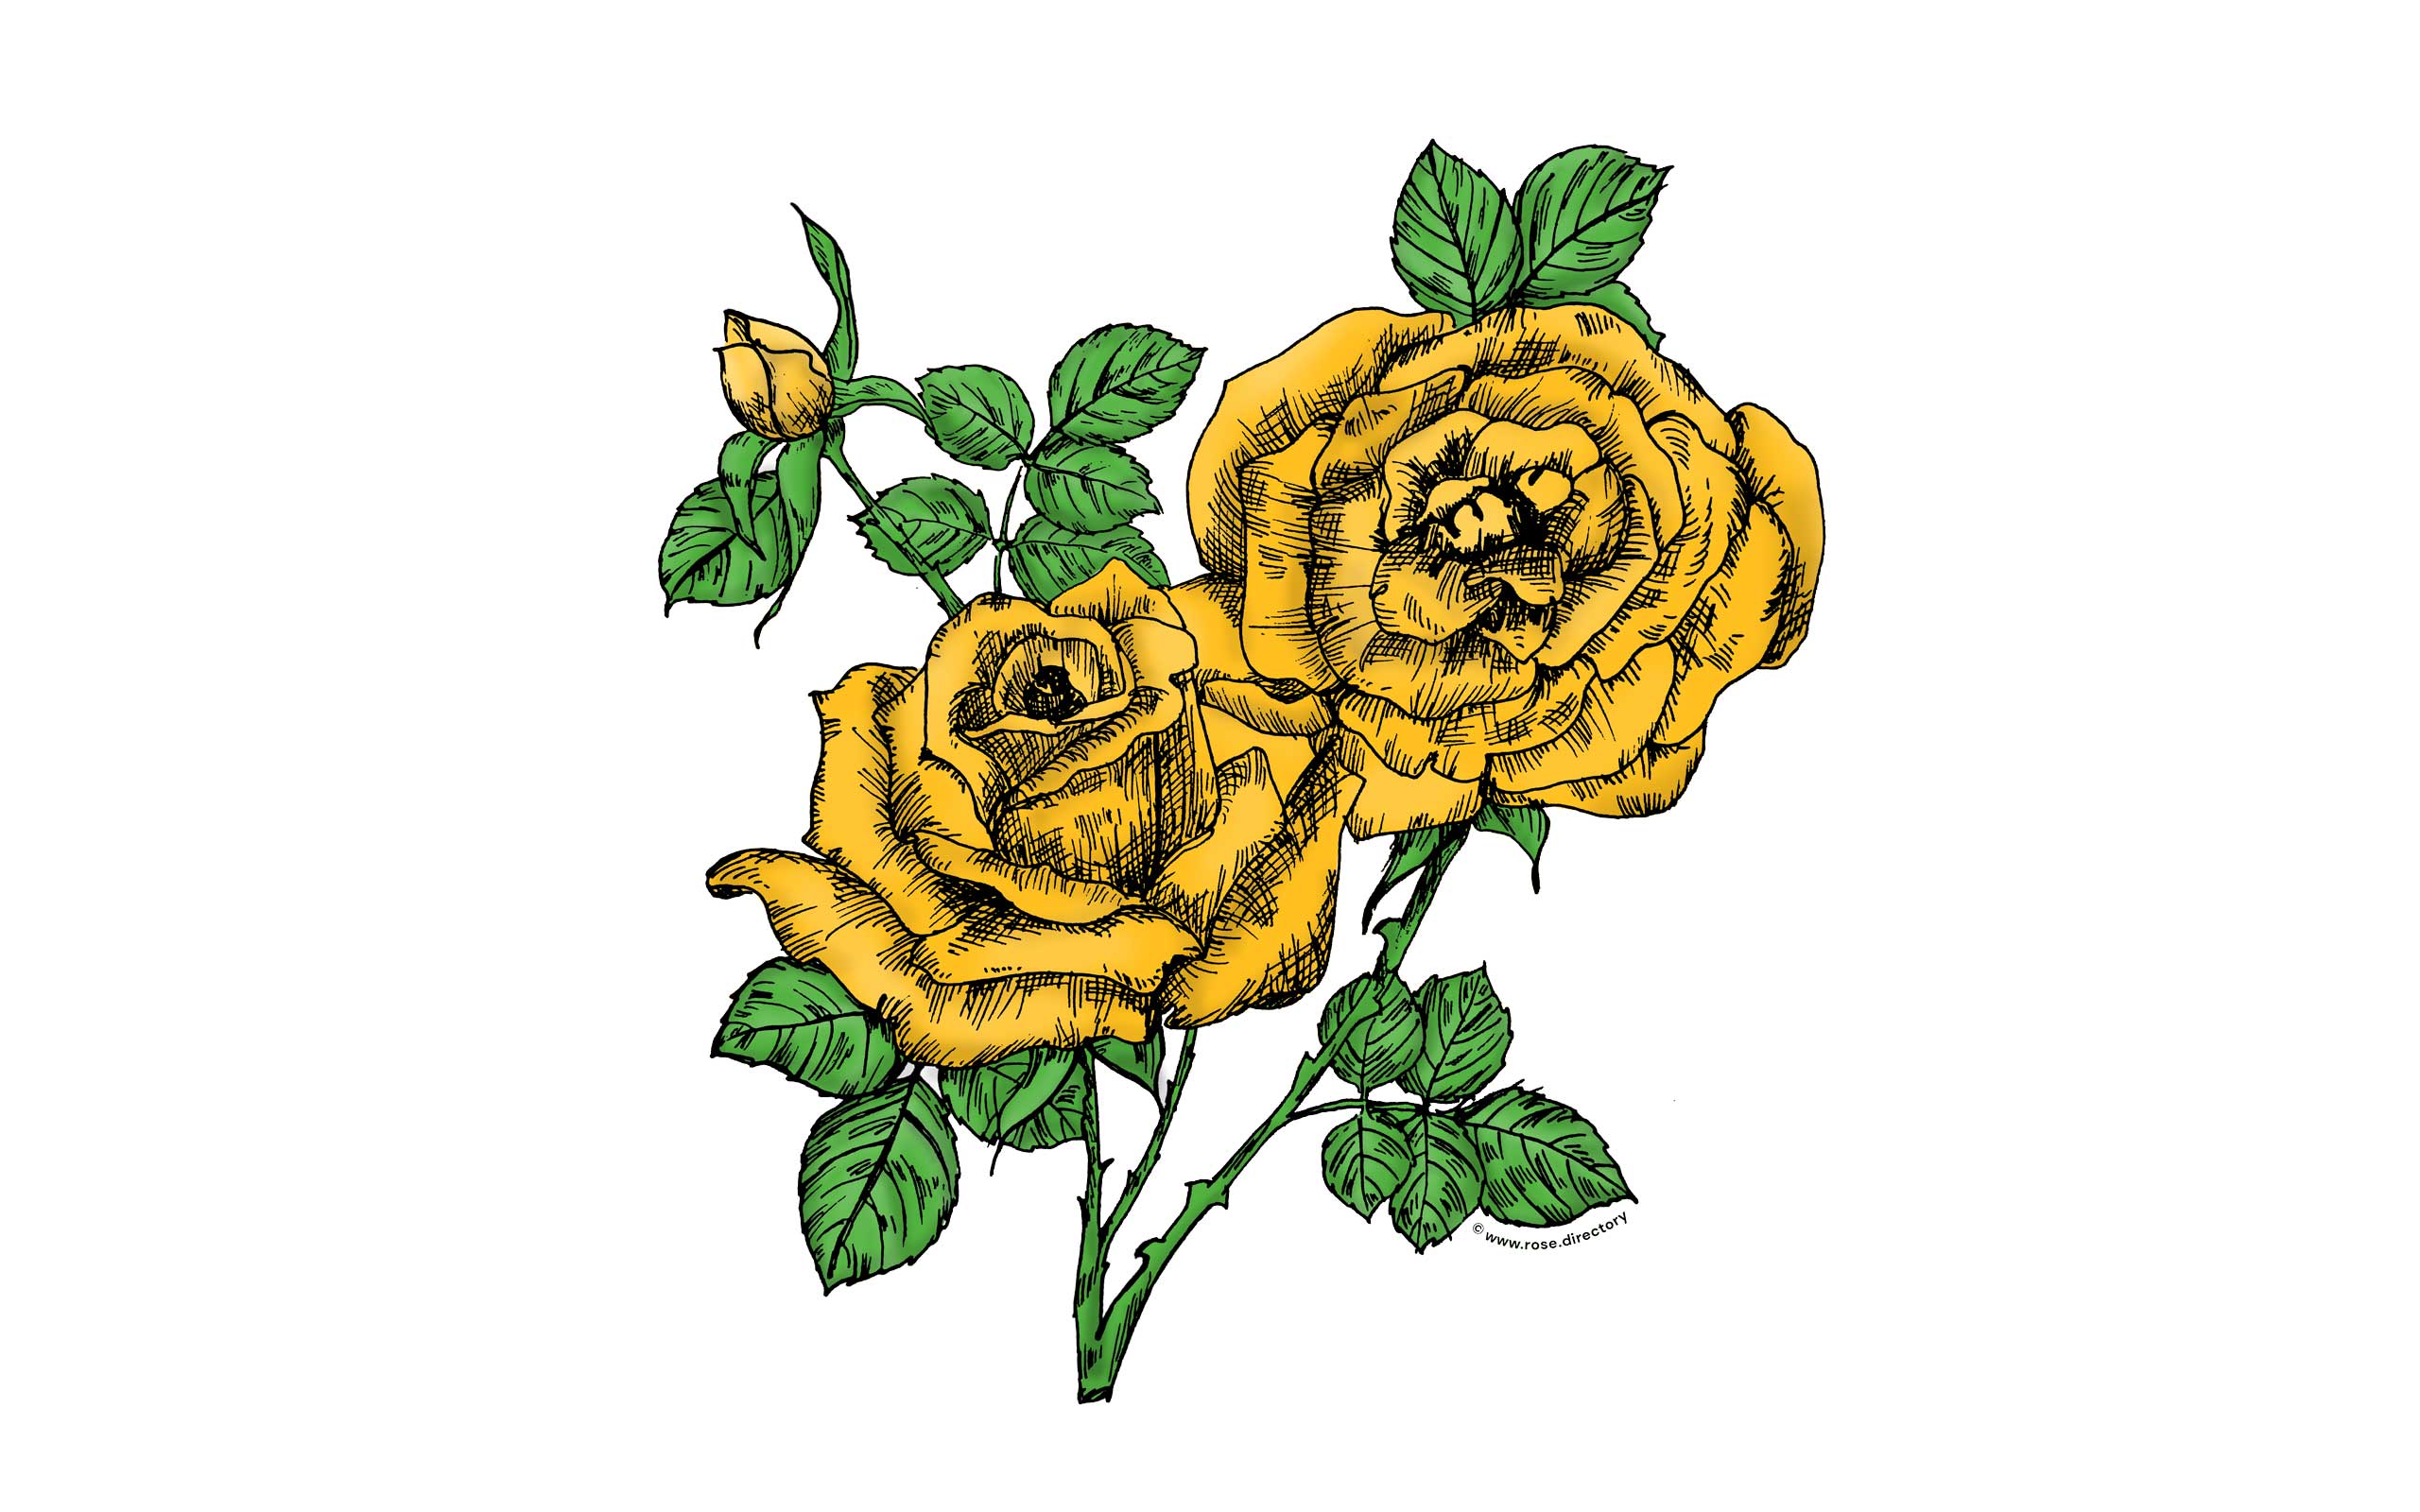 Yellow High-Centered Rose Bloom Full 26-40 Petals In 3+ Rows